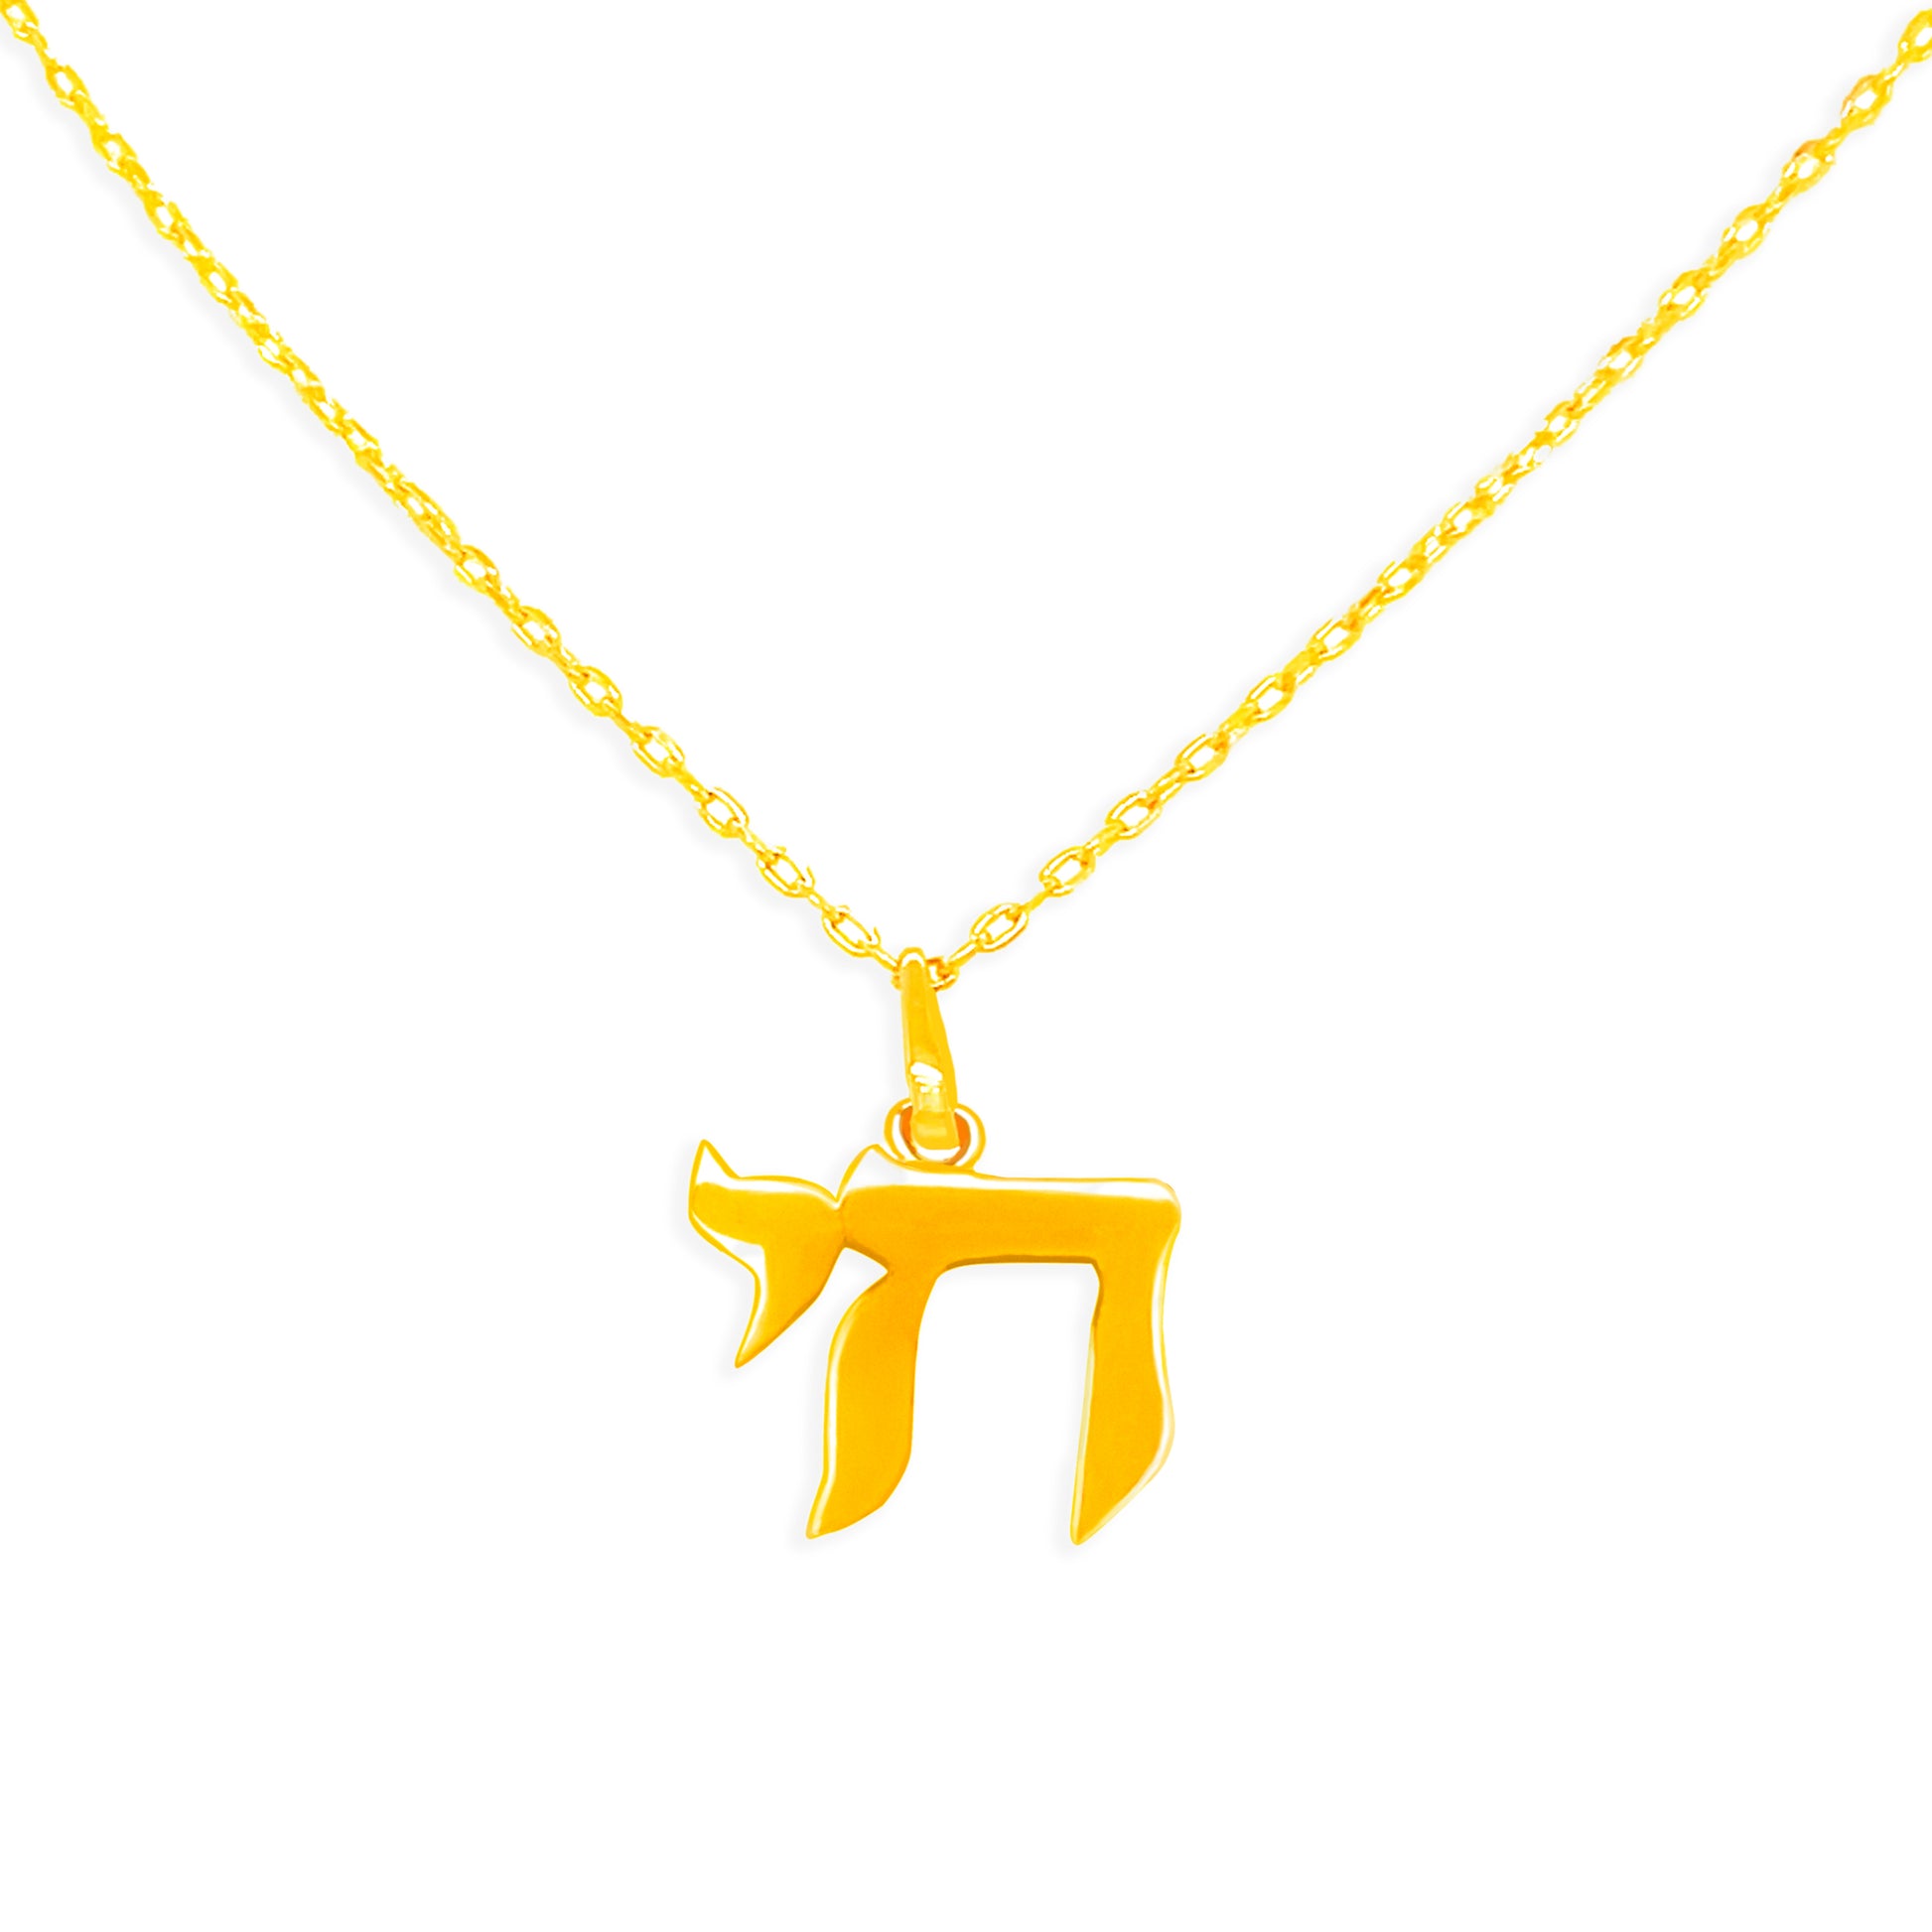 Jewish Chai Necklace - Gold Pendant Necklace In Large